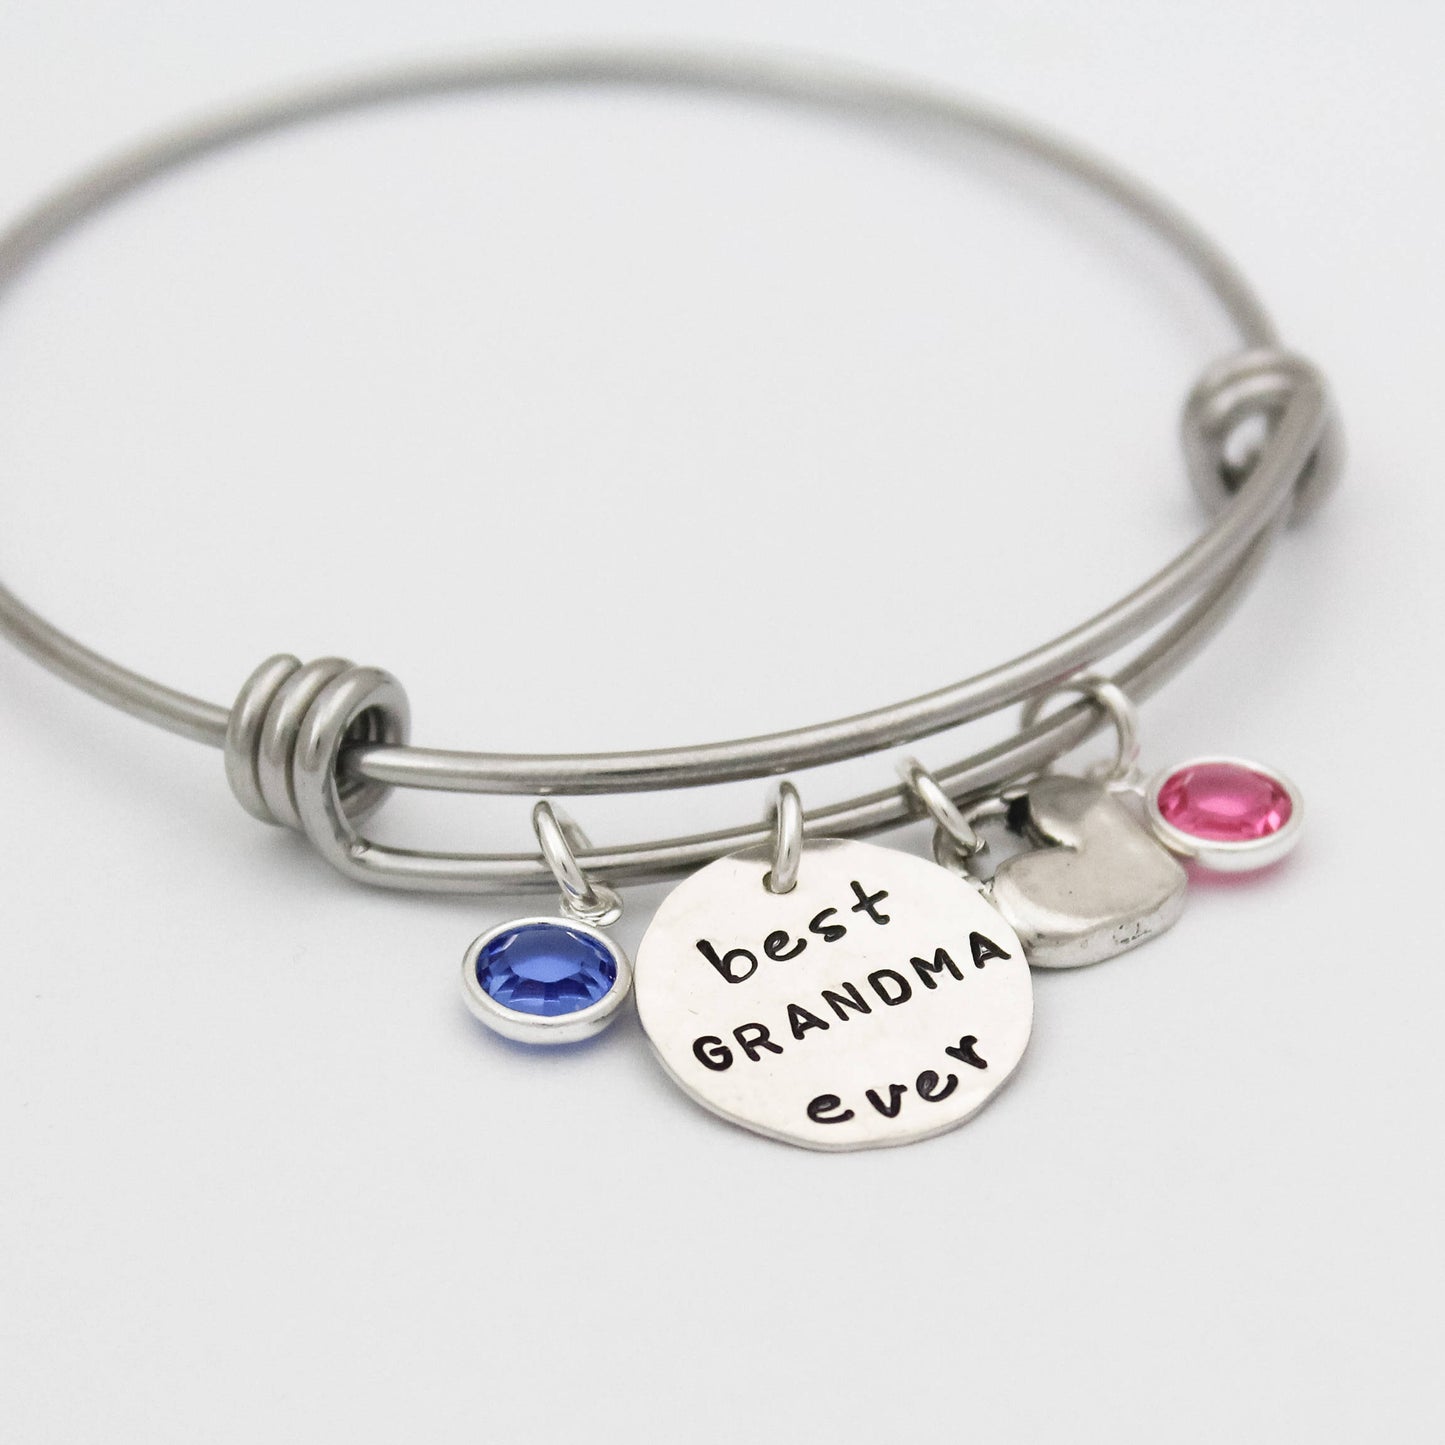 Personalized Best Grandma Ever Bracelet, Best Mom Ever Bangle, Grandmother Bracelet, Mother Bracelet, Mother's Day Gift,Hand Stamped Jewelry